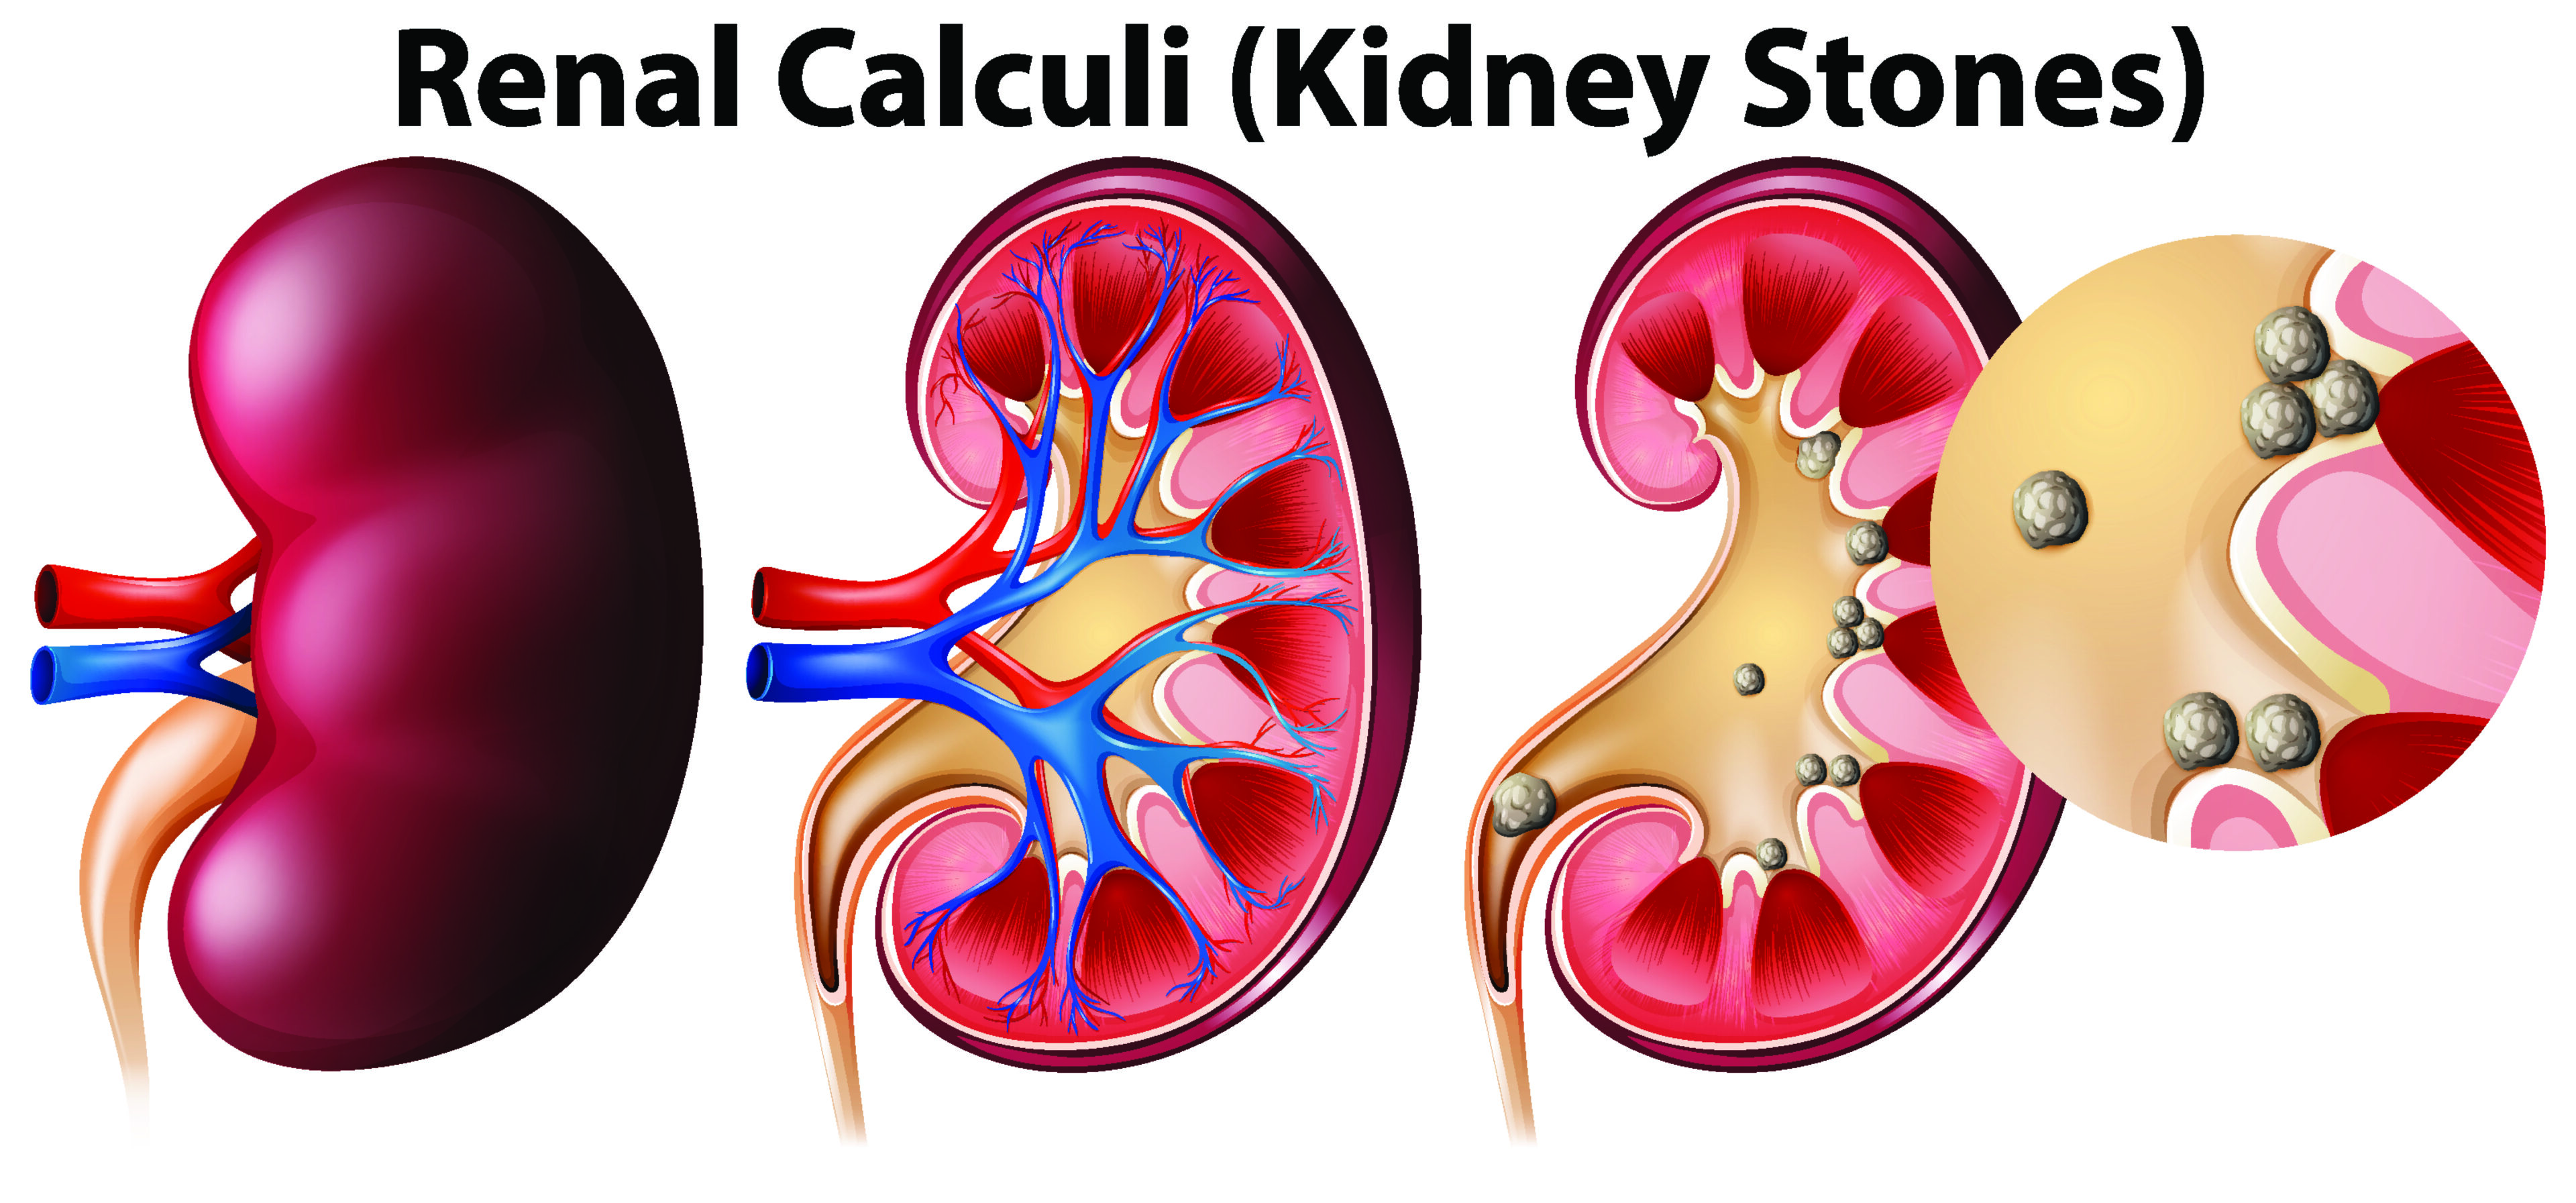 Kidney stones and kidney infections